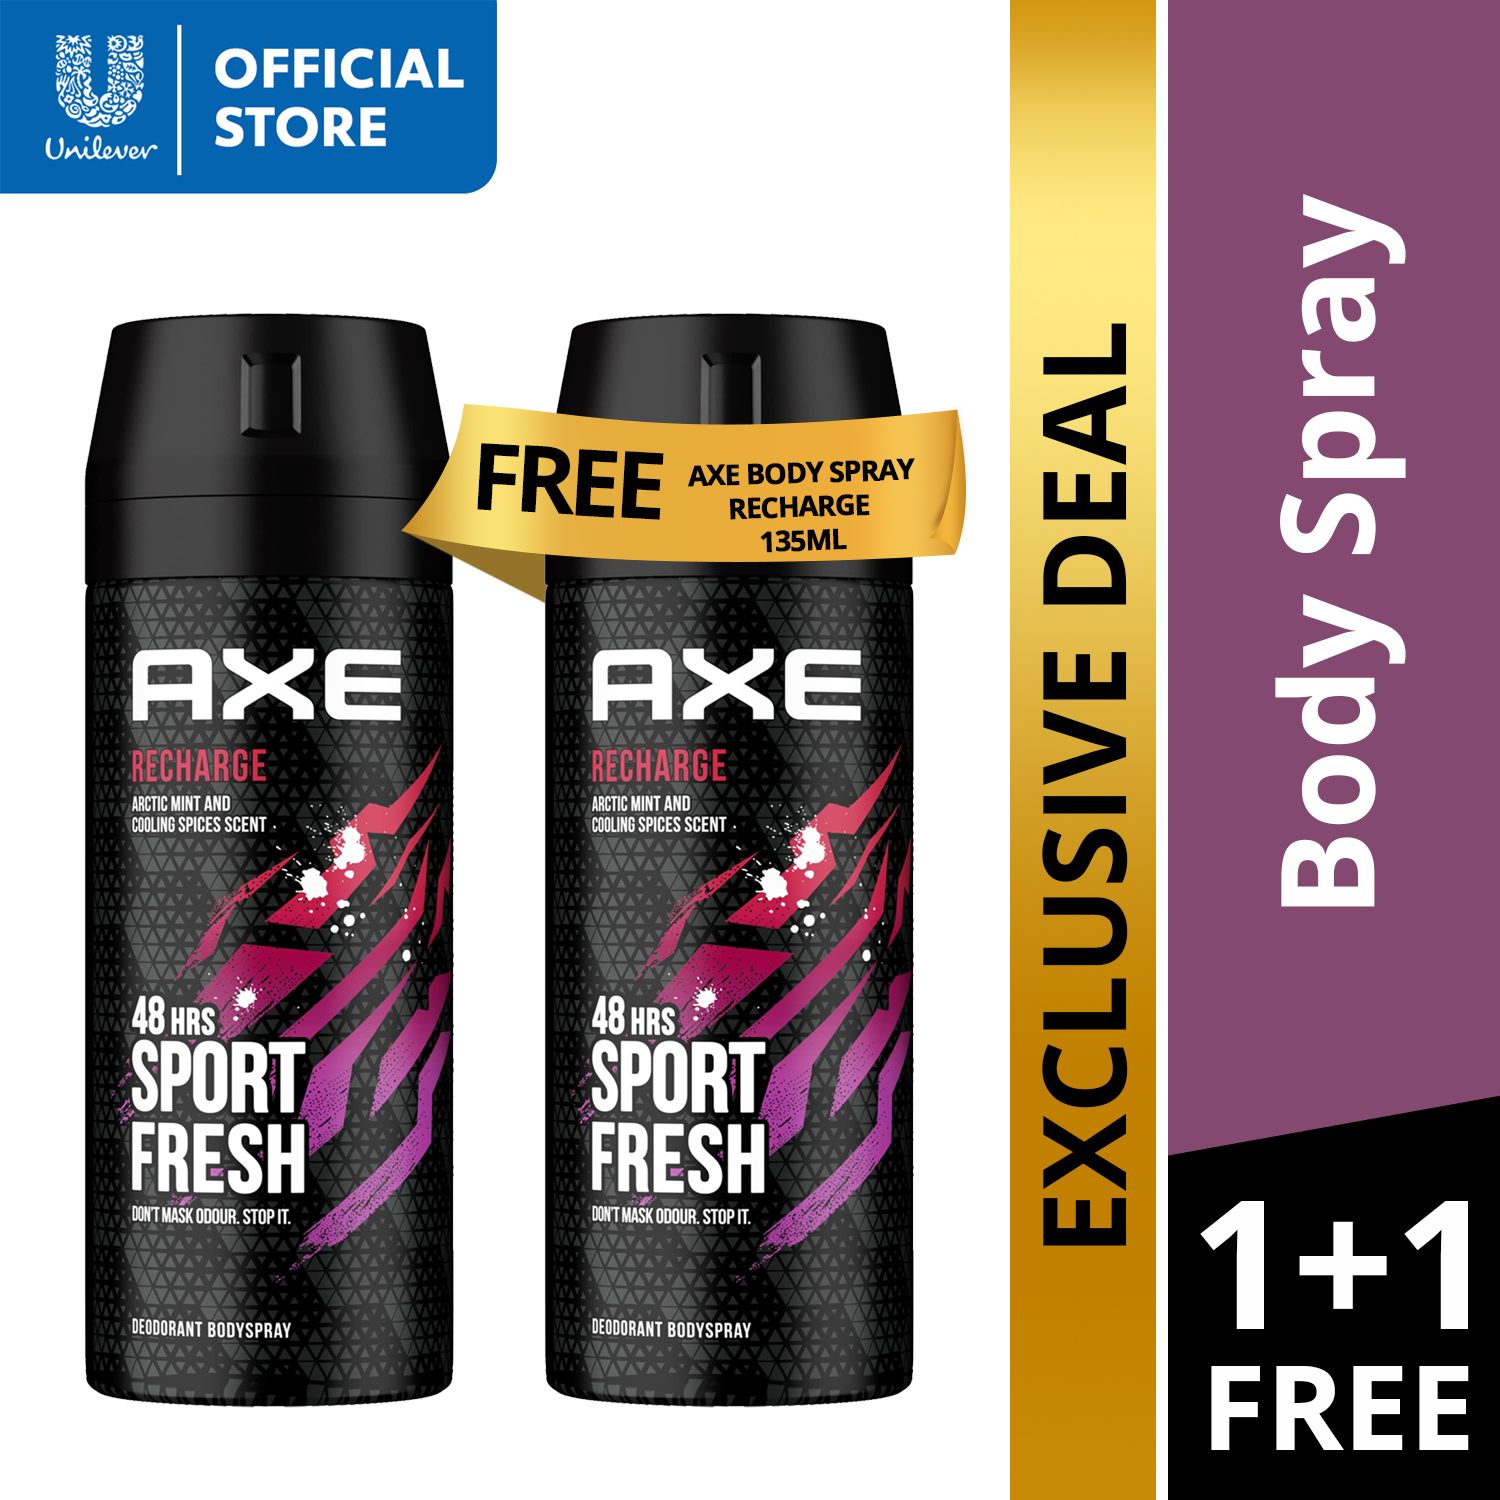 Buy 1 Axe Spray Recharge Red 135ml Get 1 Fee | Lazada PH